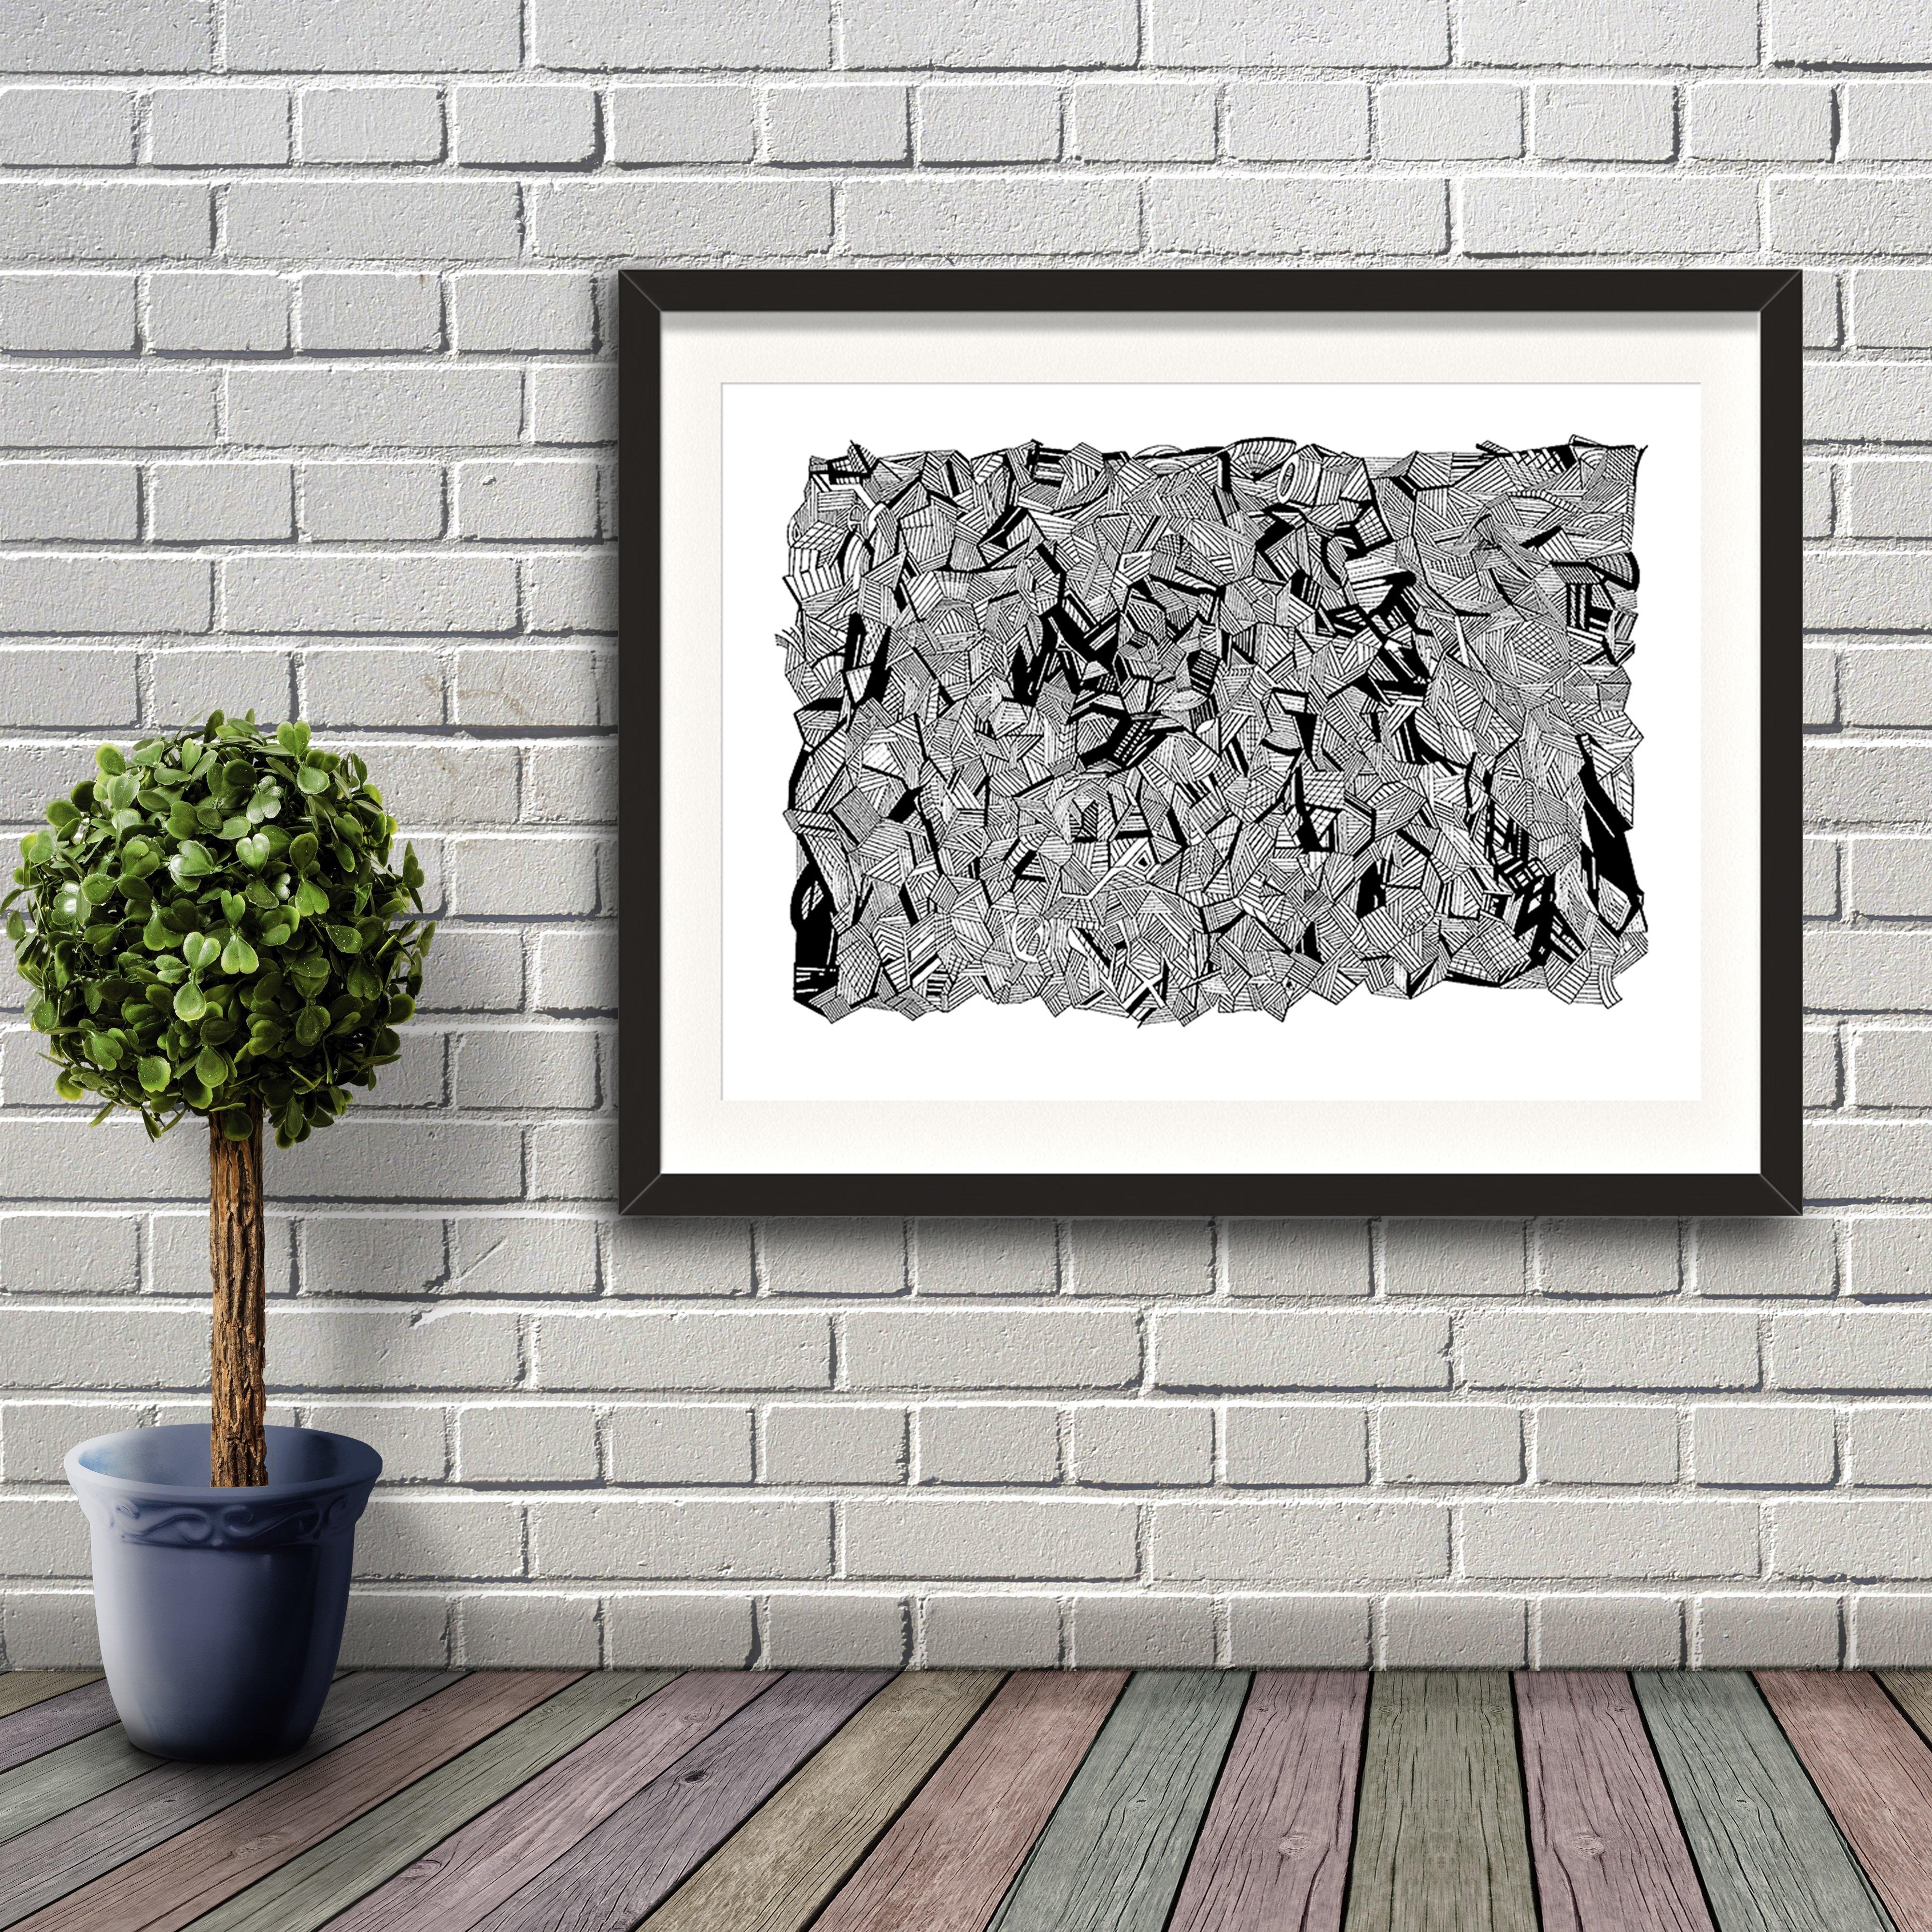 A fine art print from Jason Clarke titled Project 2 drawn with a black Pentel pen and dated 25/7/15. Artwork shown in a black frame hanging on a brick wall.